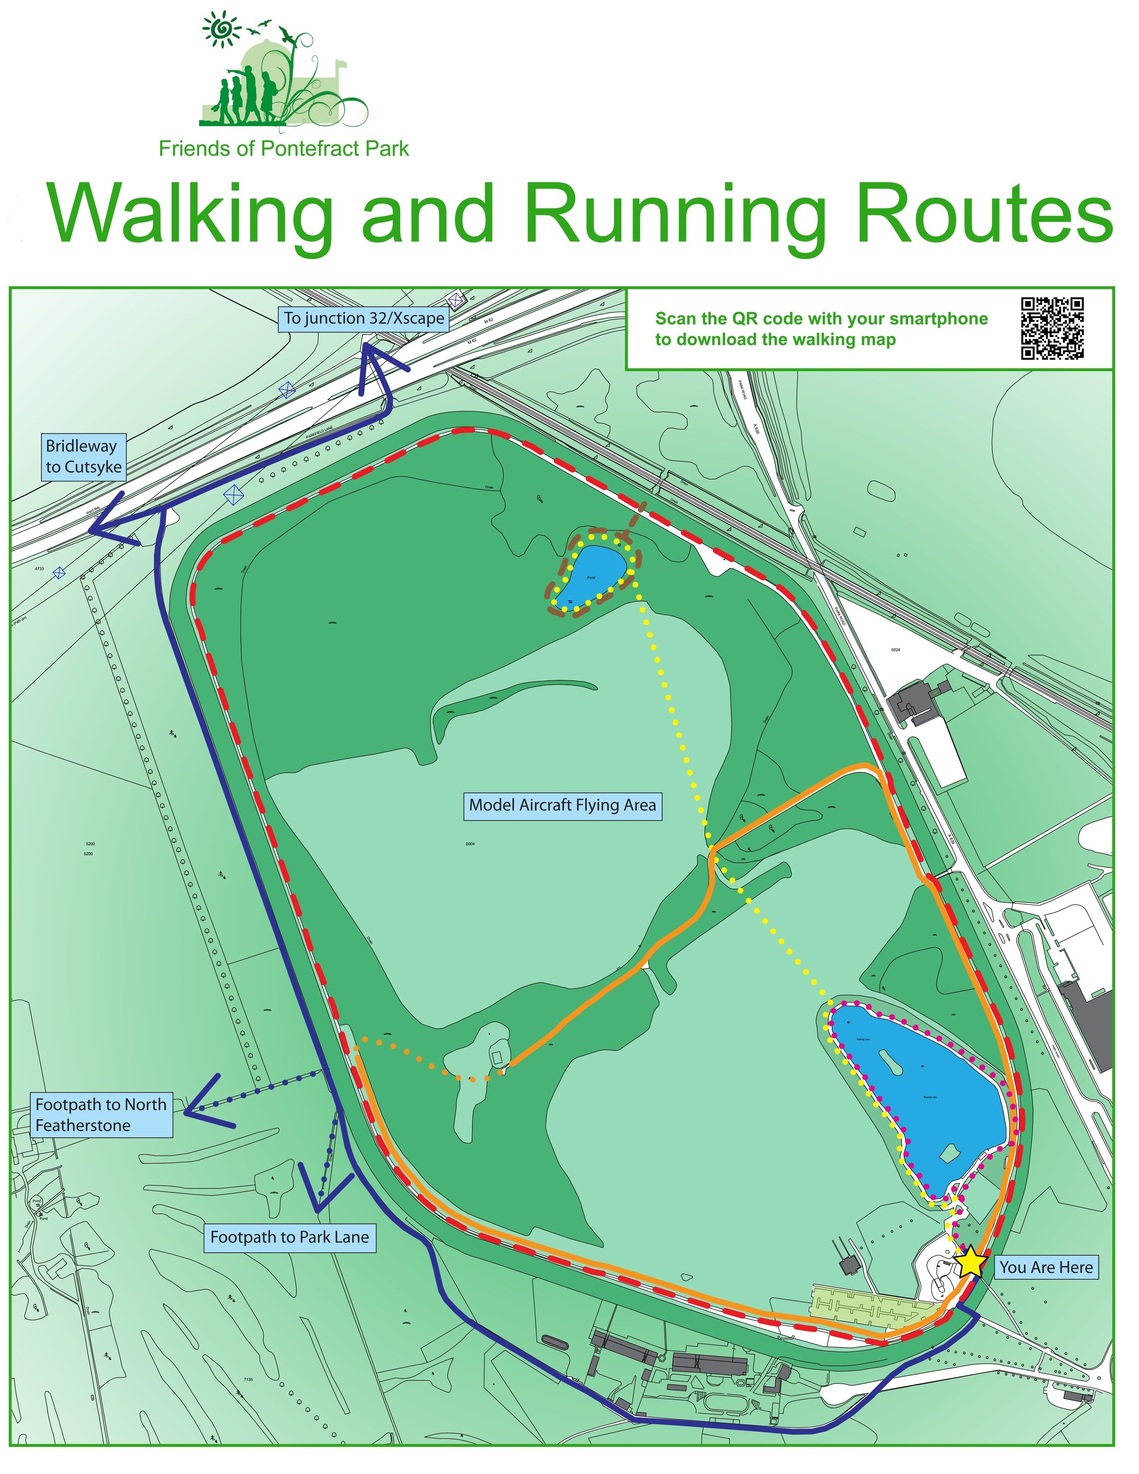 Walking and running routes